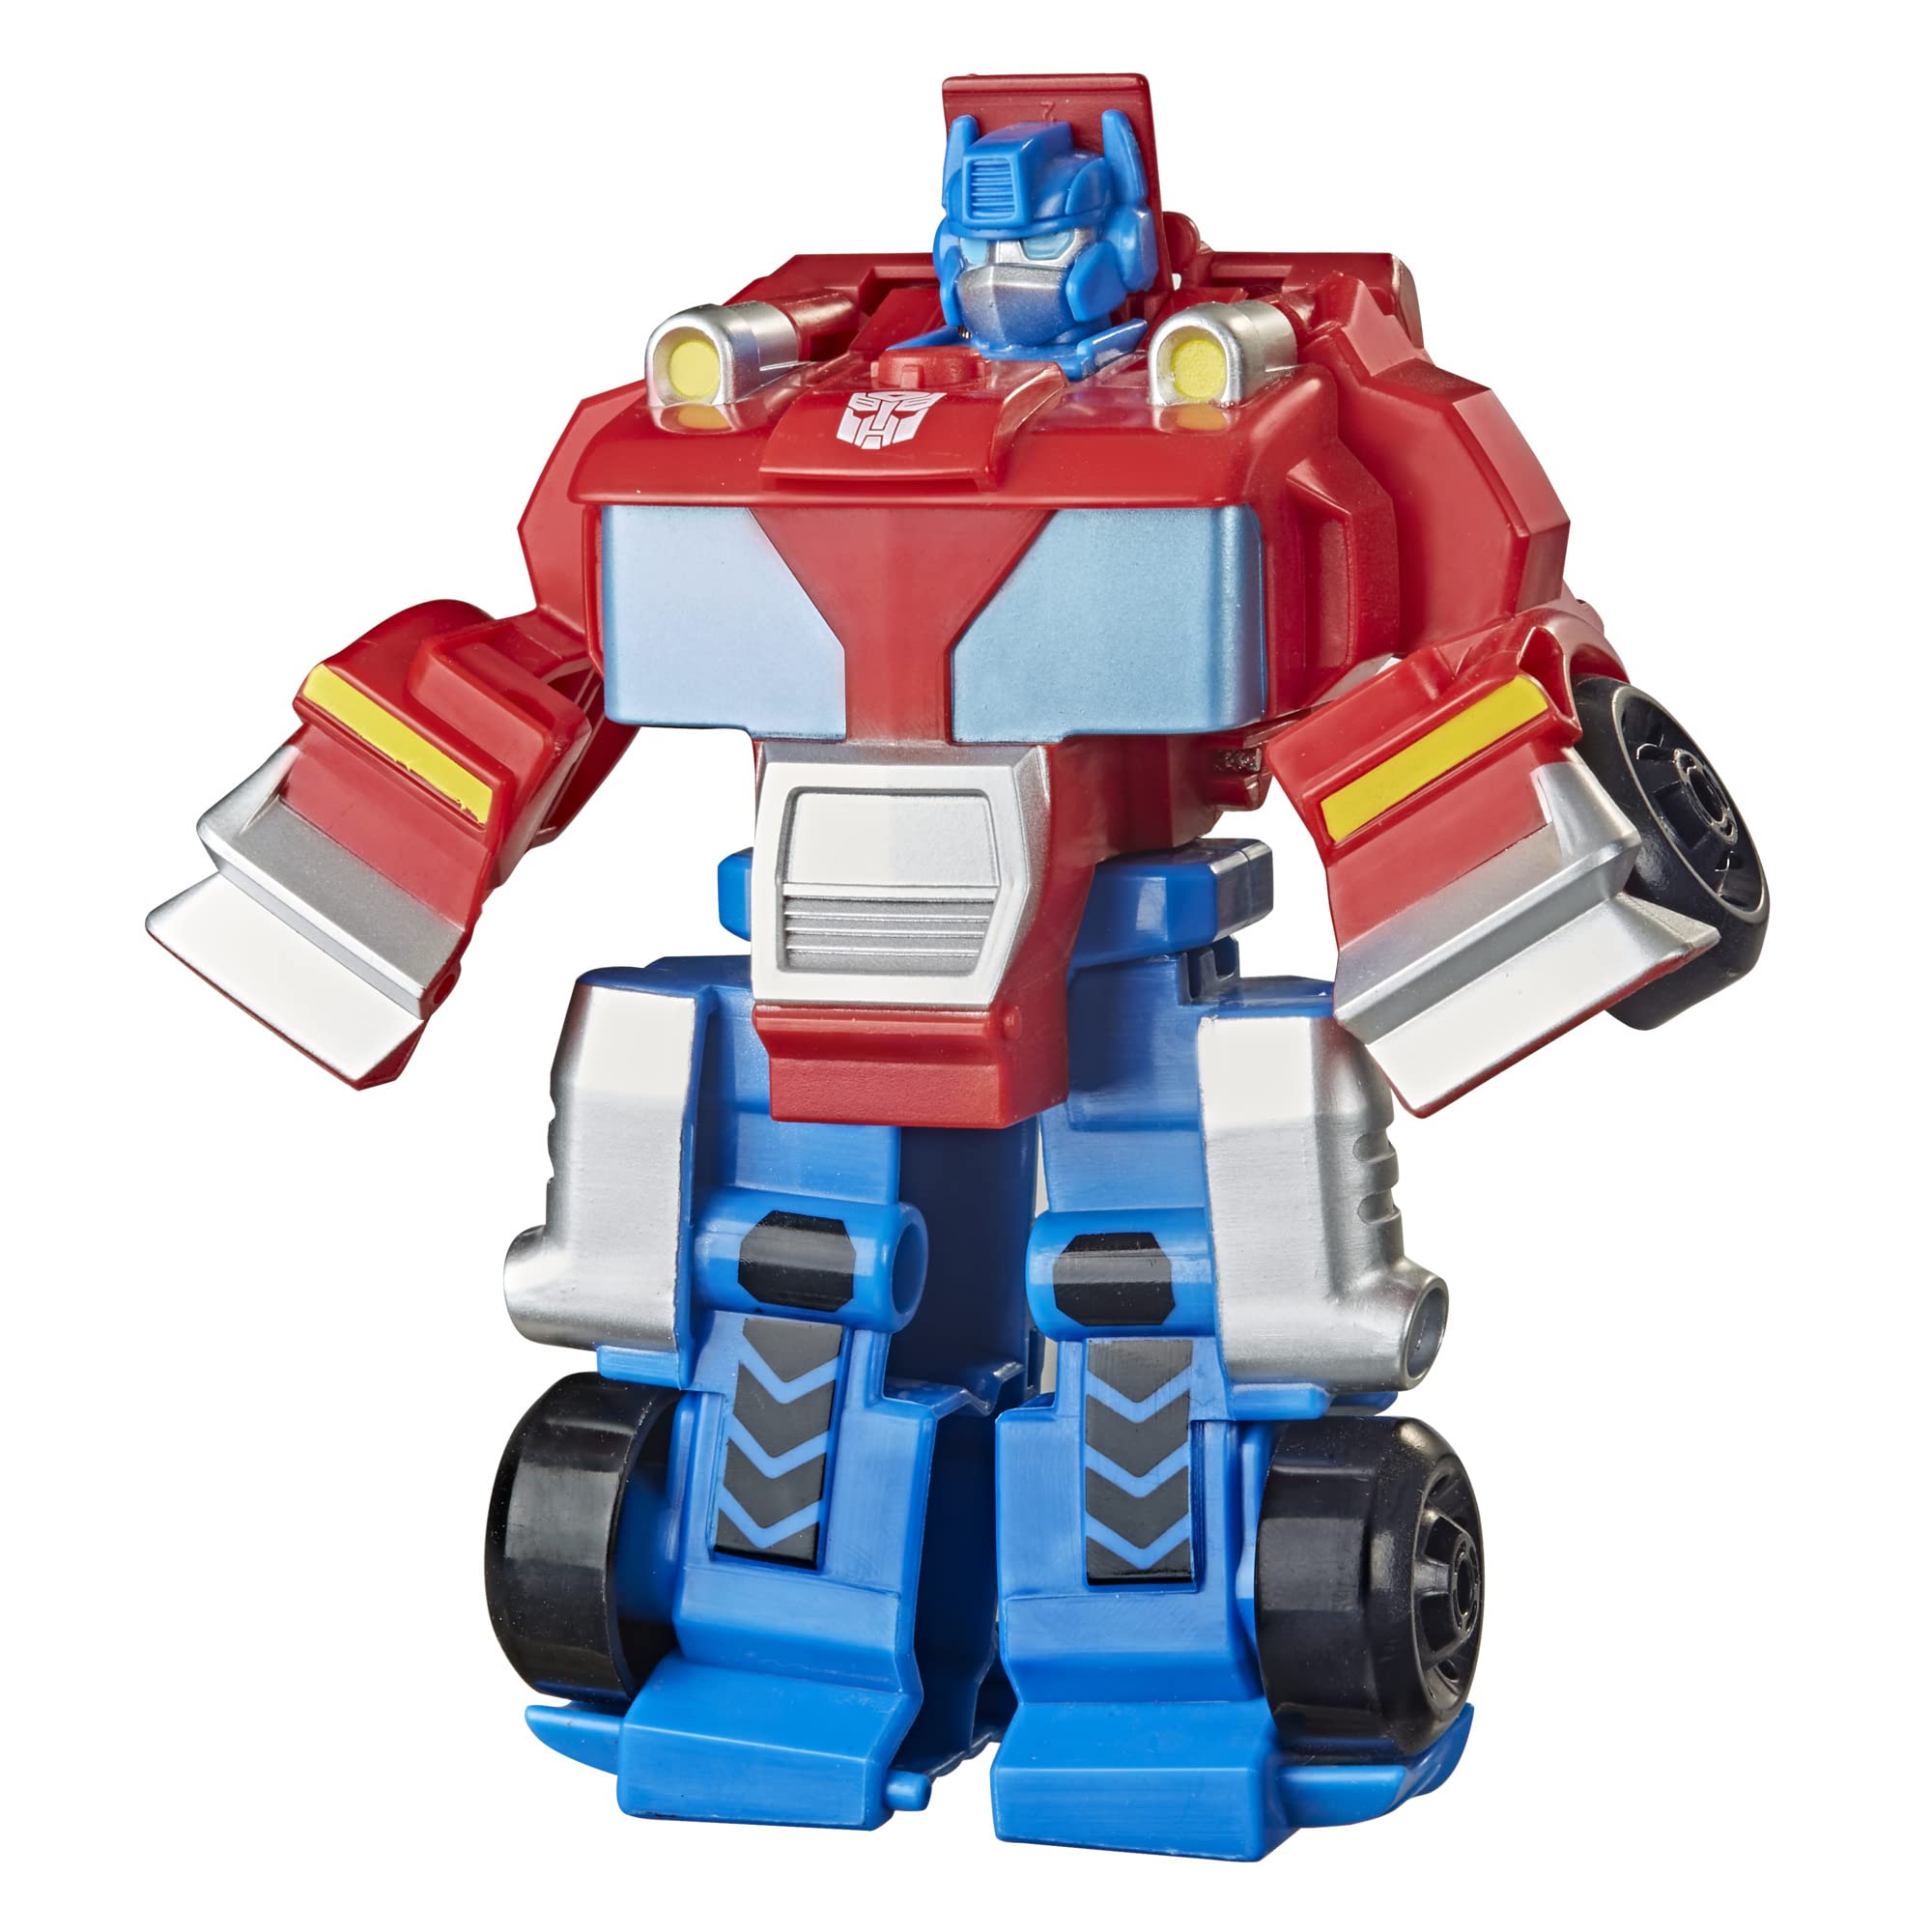 4.5" Transformers Playskool Heroes Rescue Bots Academy Team Optimus Prime $6.49 + Free Shipping w/ Prime or on orders over $35